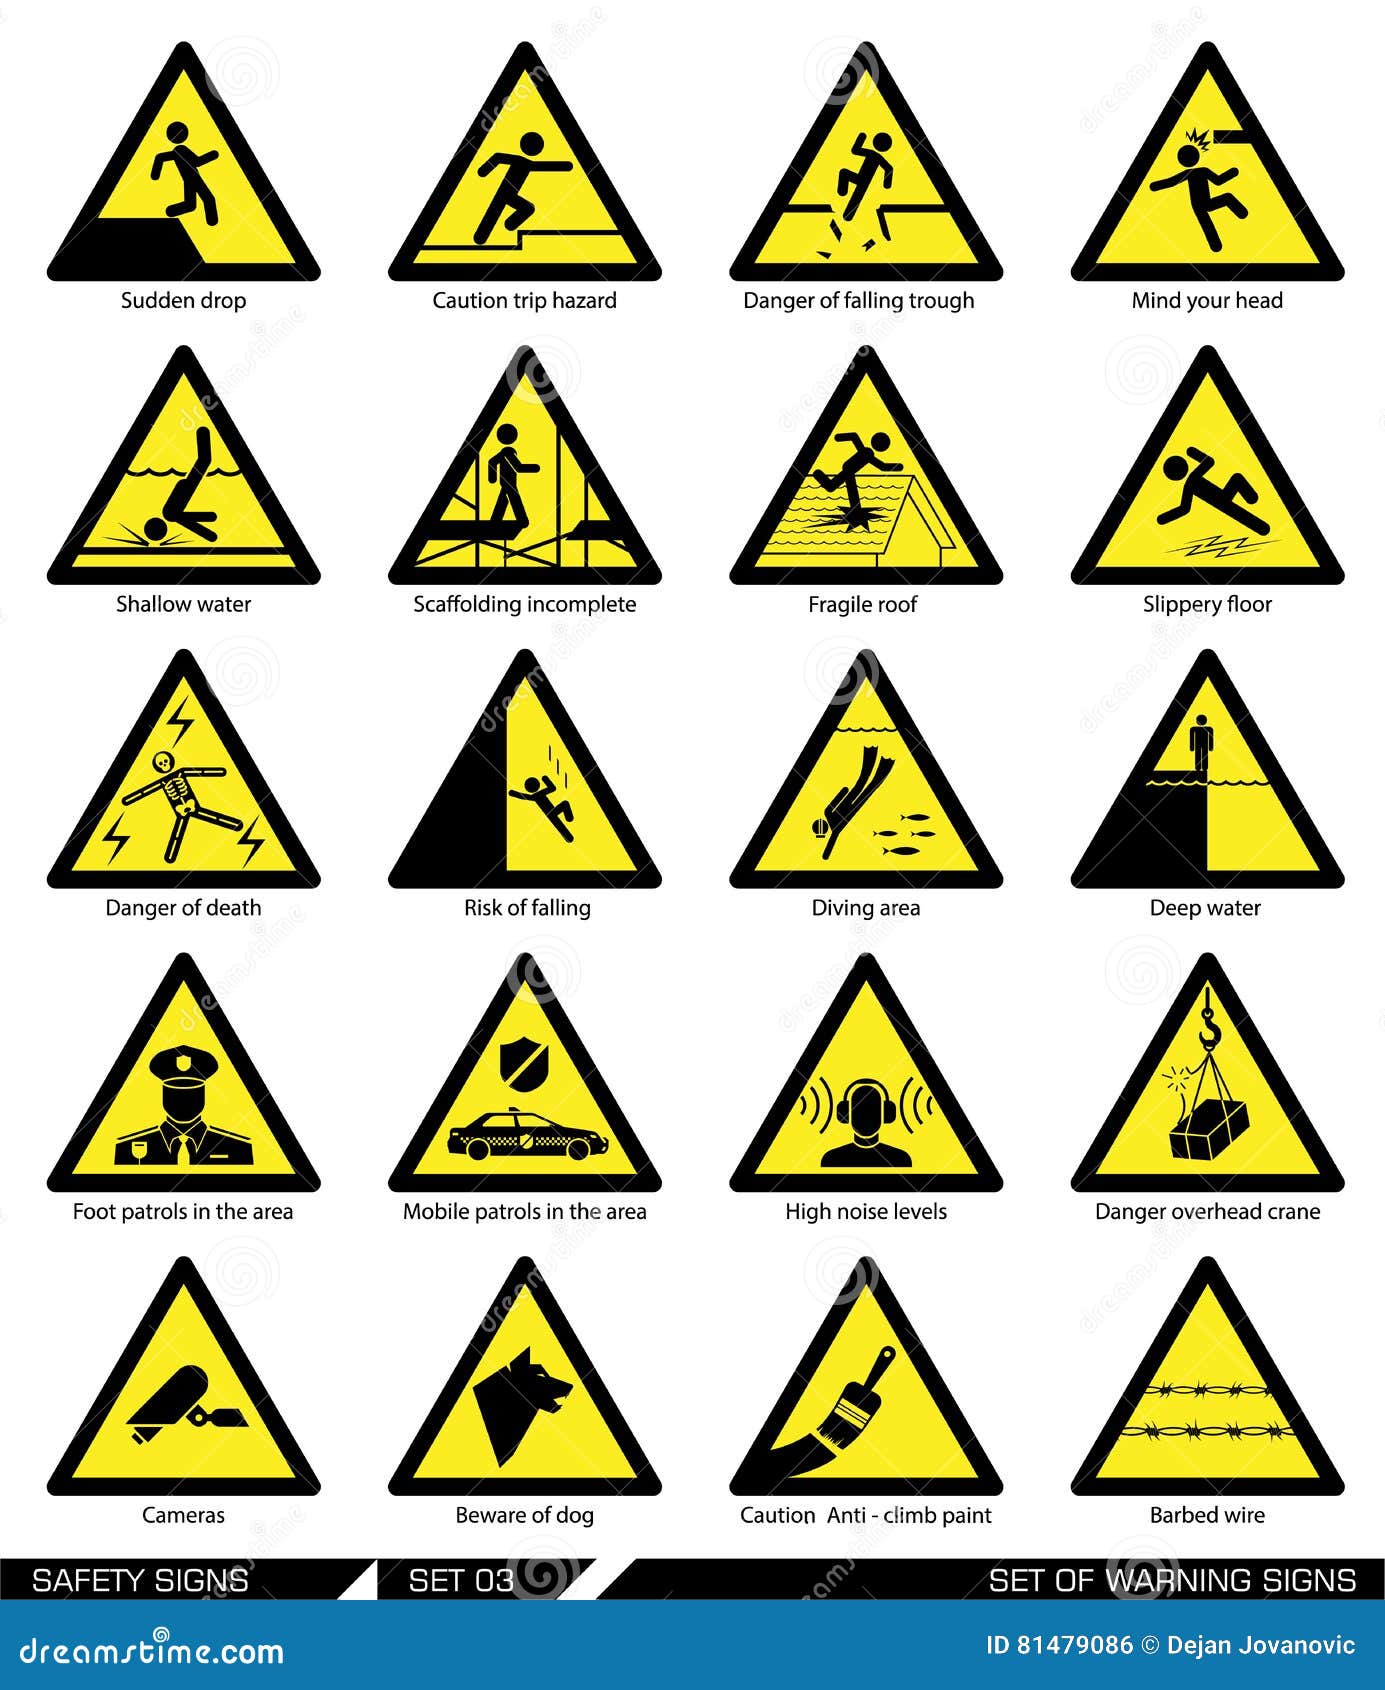 4mm Correx 300x100mm 'Warning Fragile roof' Site Safety Signs 